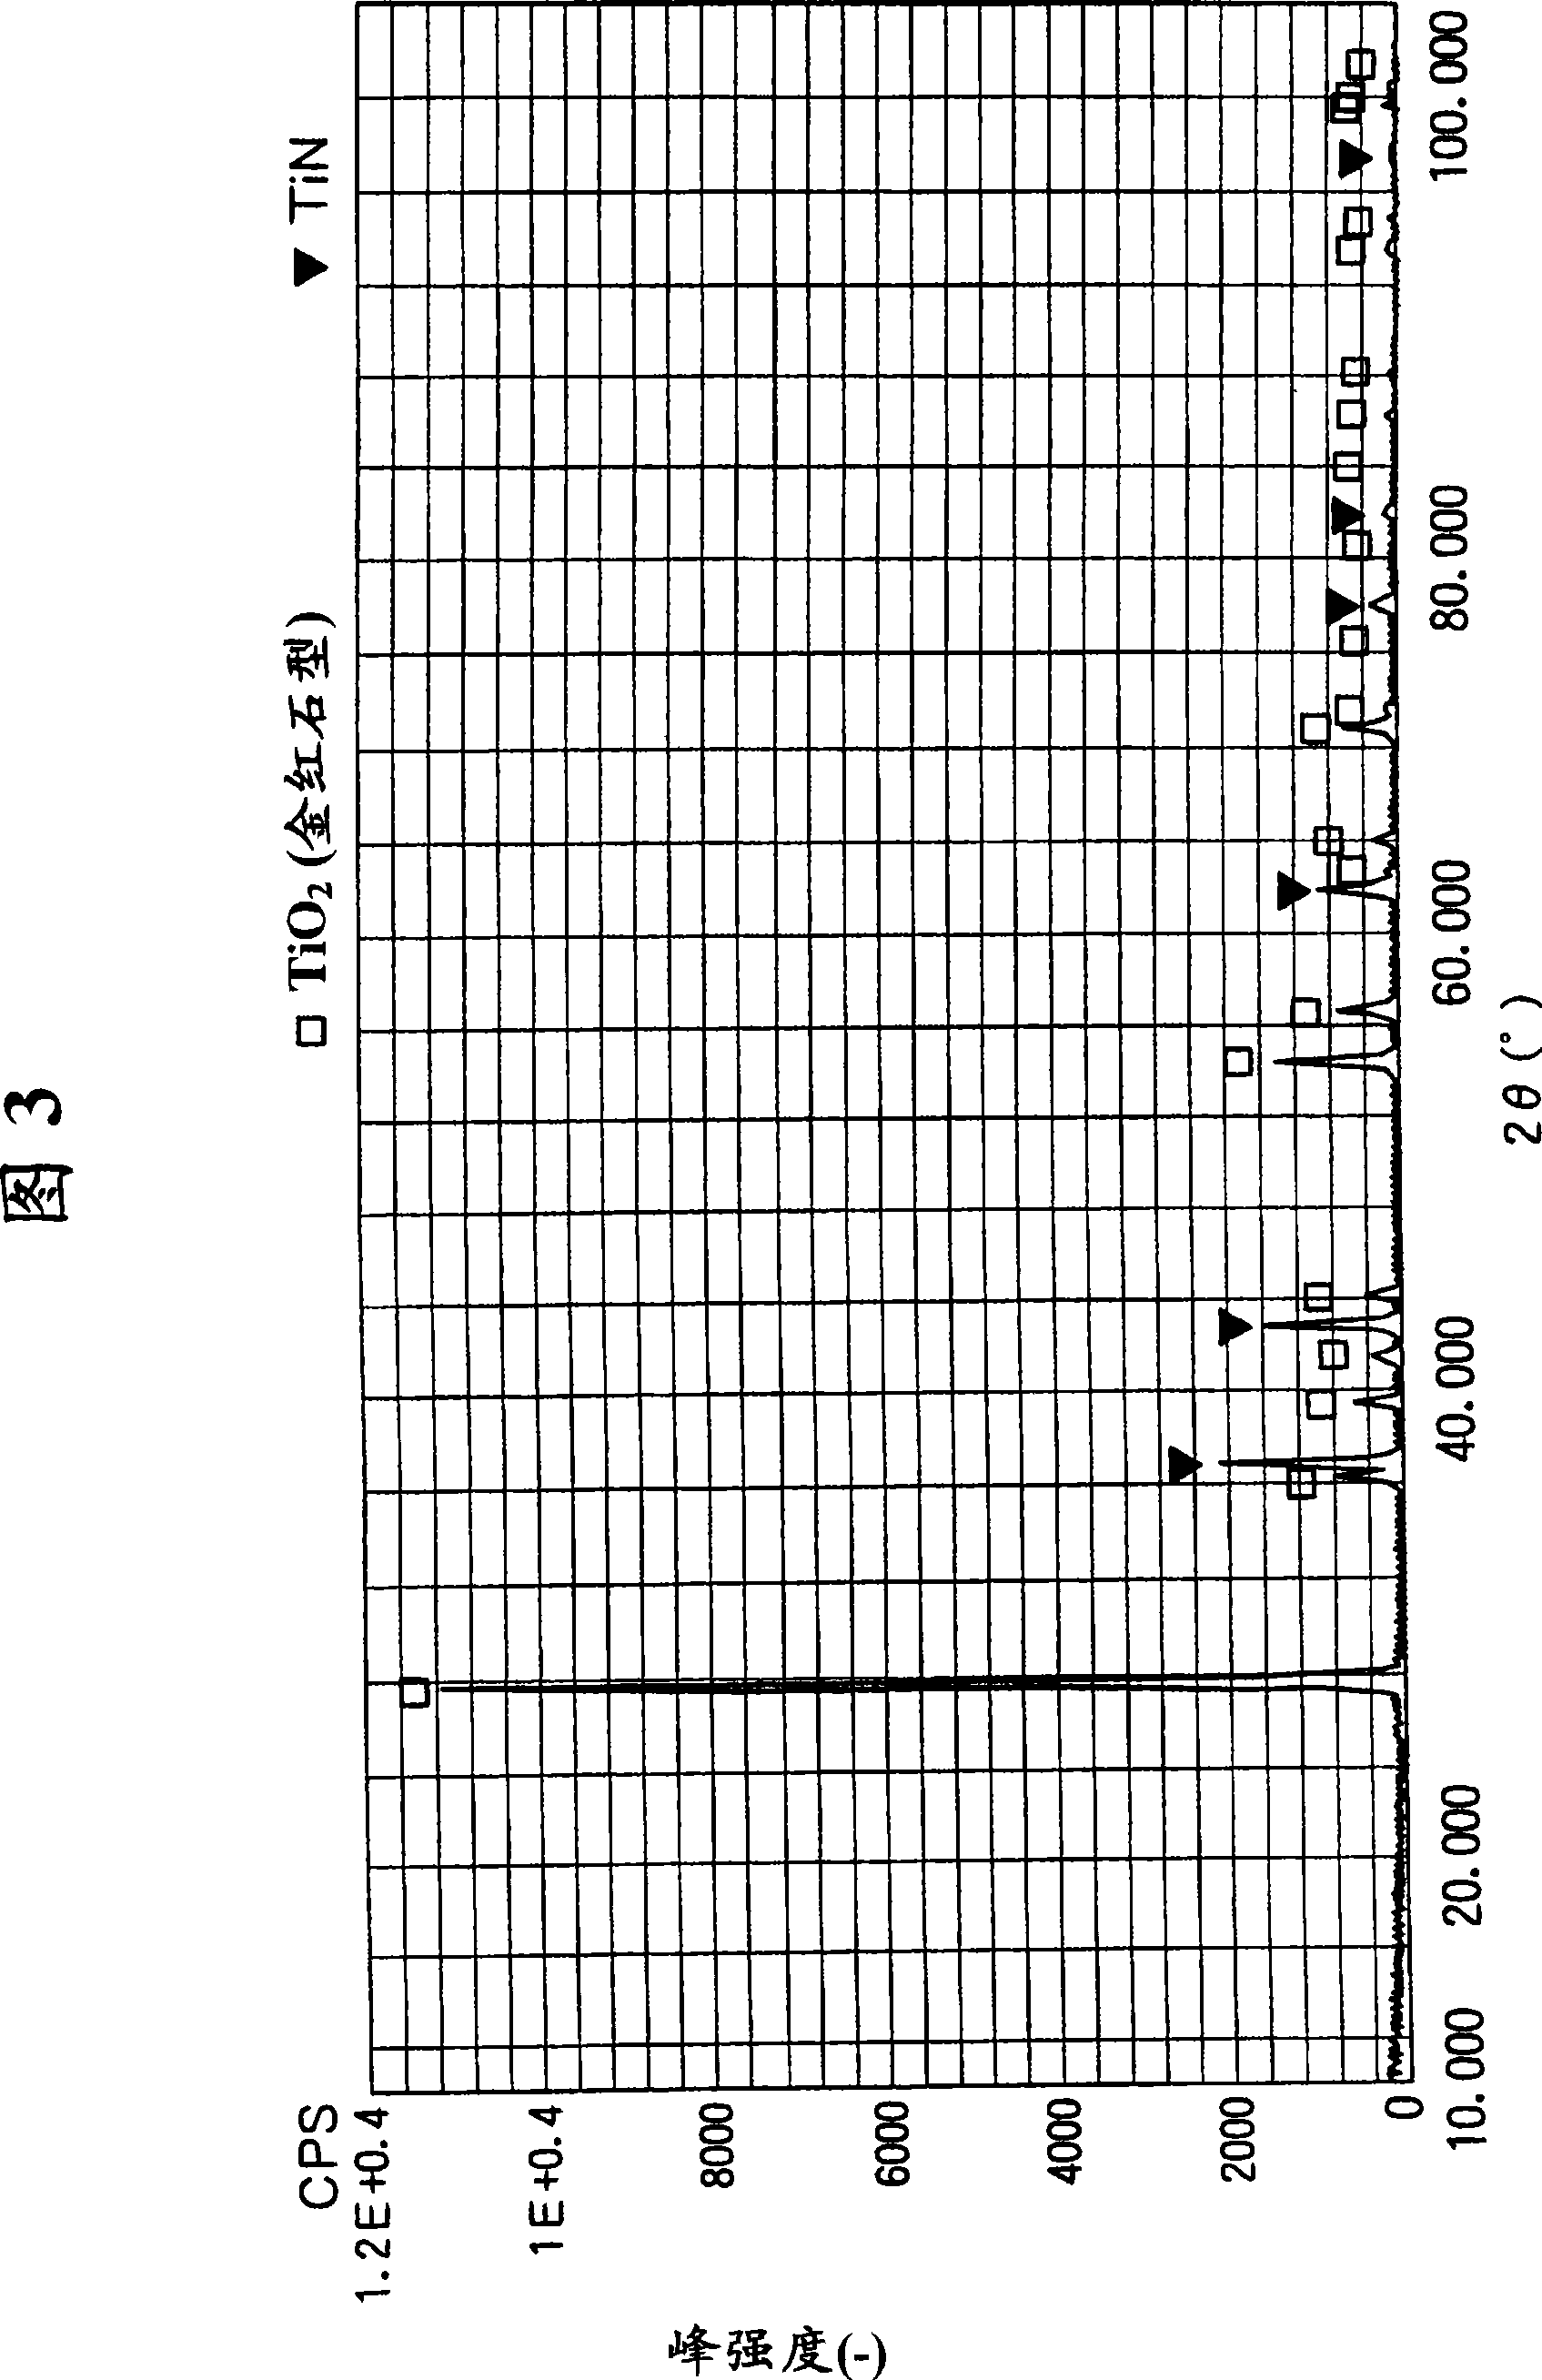 Alumina coating correlation technique with alpha type crystal structure